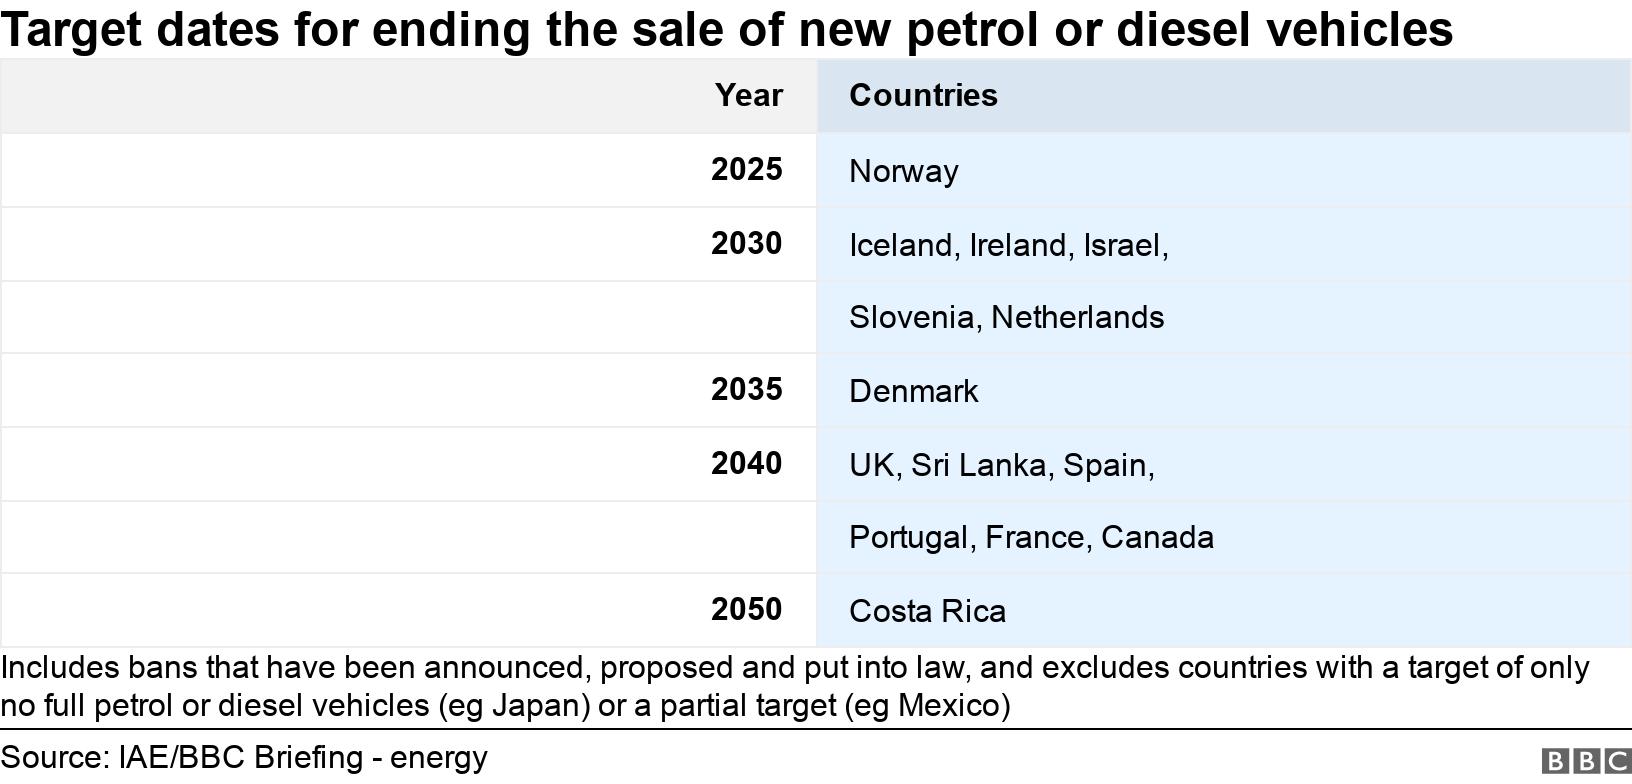 Target dates for ending the sale of new petrol or diesel vehicles. .  Includes bans that have been announced, proposed and put into law, and excludes countries with a target of only no full petrol or diesel vehicles (eg Japan) or a partial target (eg Mexico).